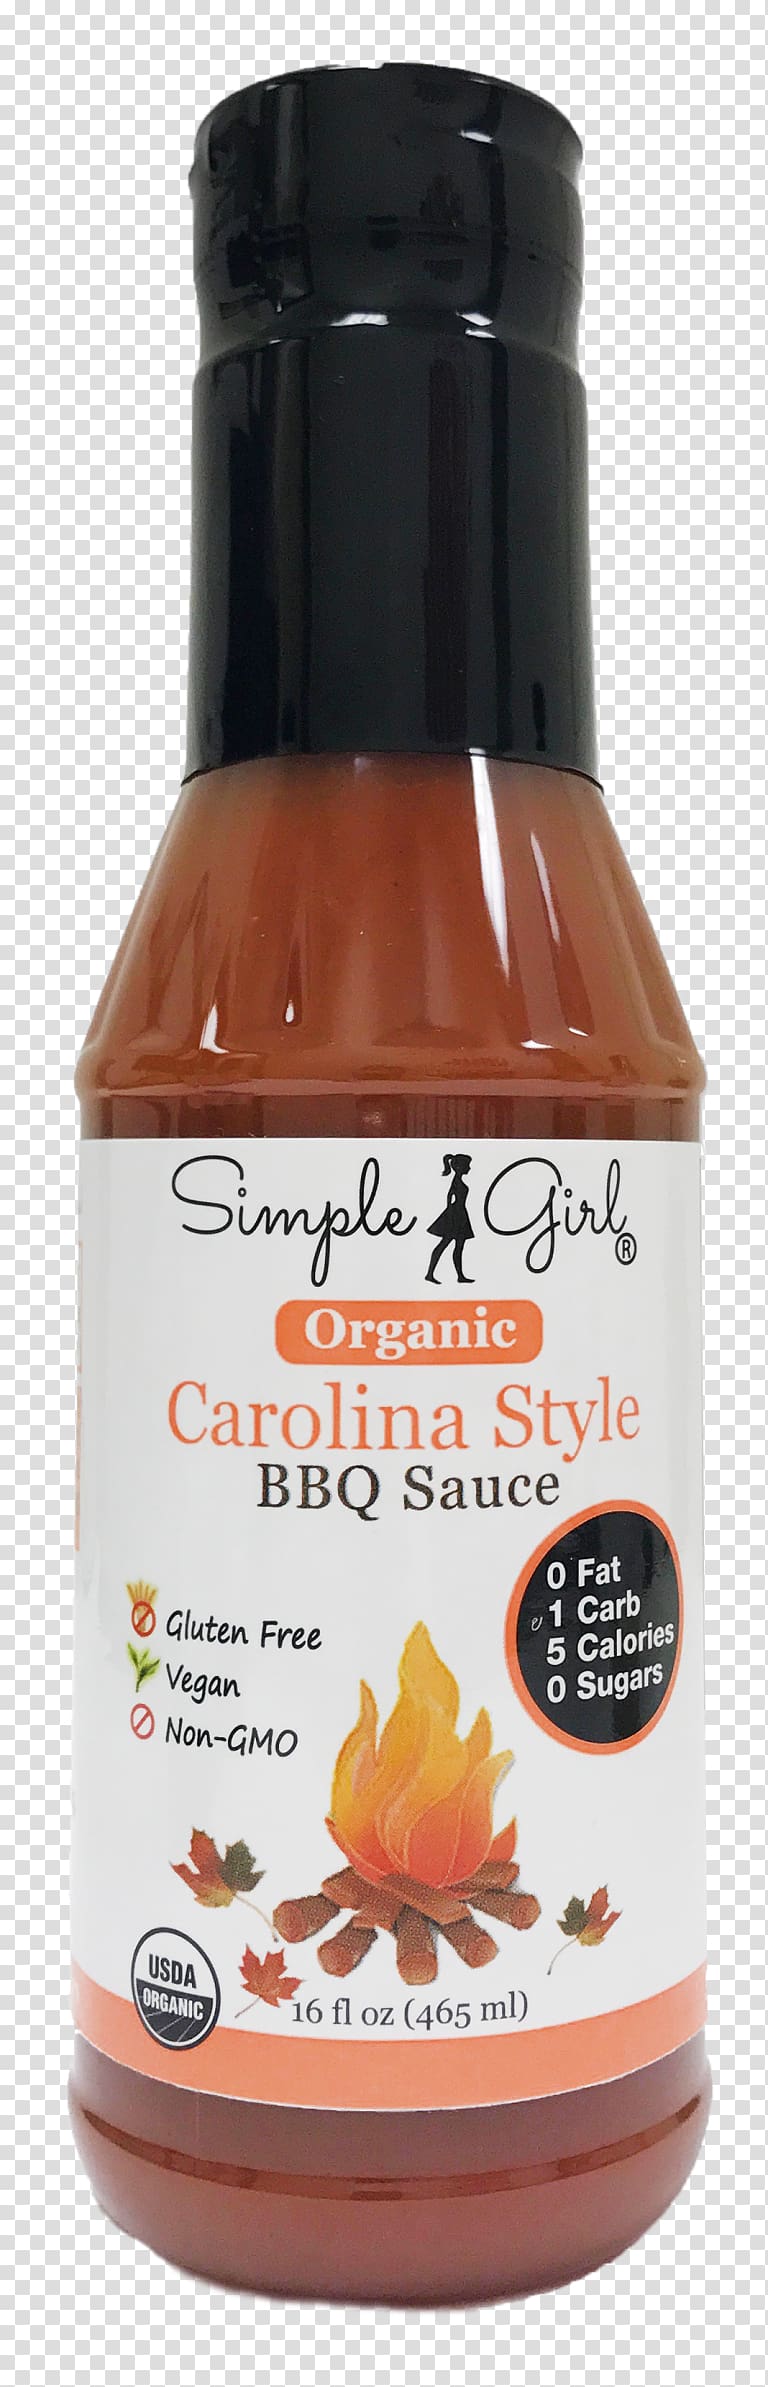 Sweet chili sauce Barbecue sauce Gluten-free diet Hot Sauce Low-carbohydrate diet, others transparent background PNG clipart